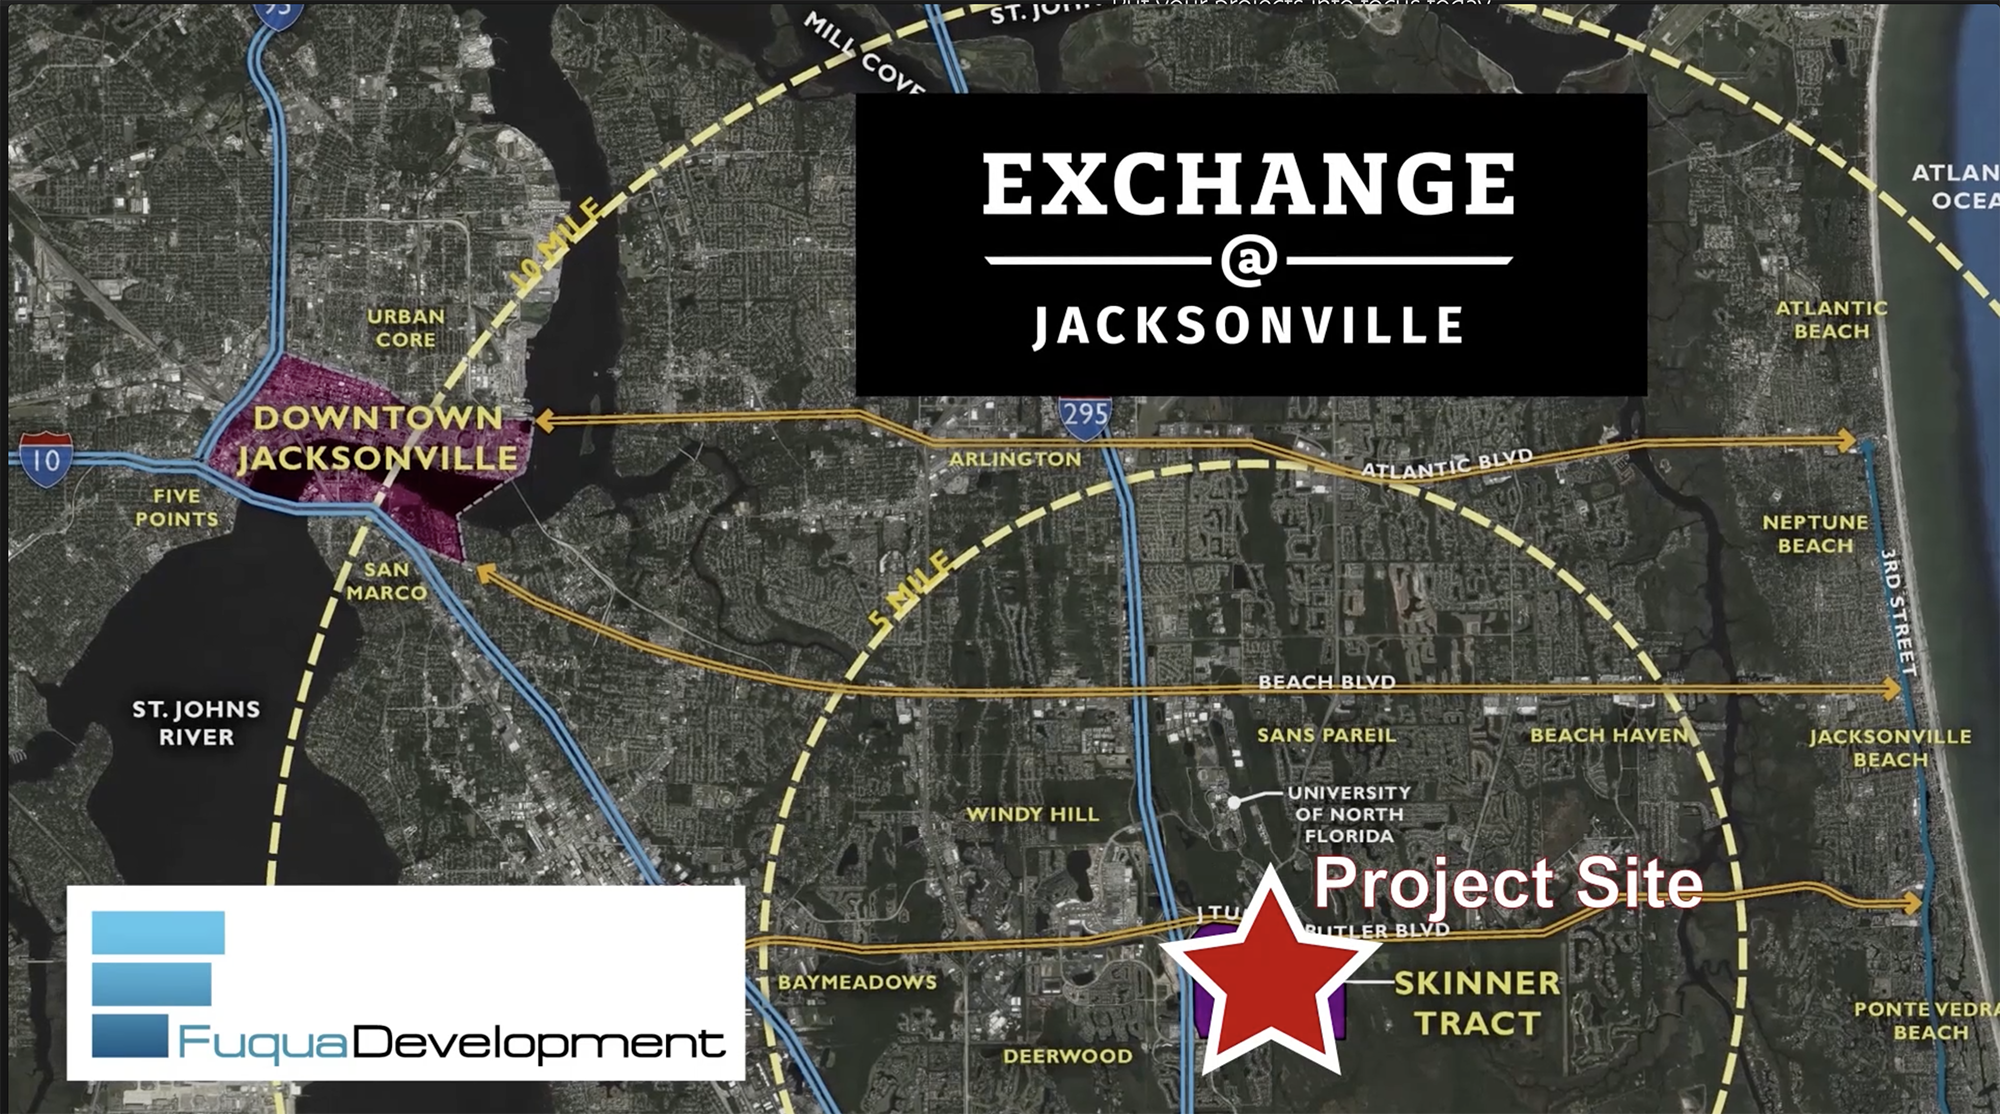 The Exchange was proposed  at northwest Butler and I-295.